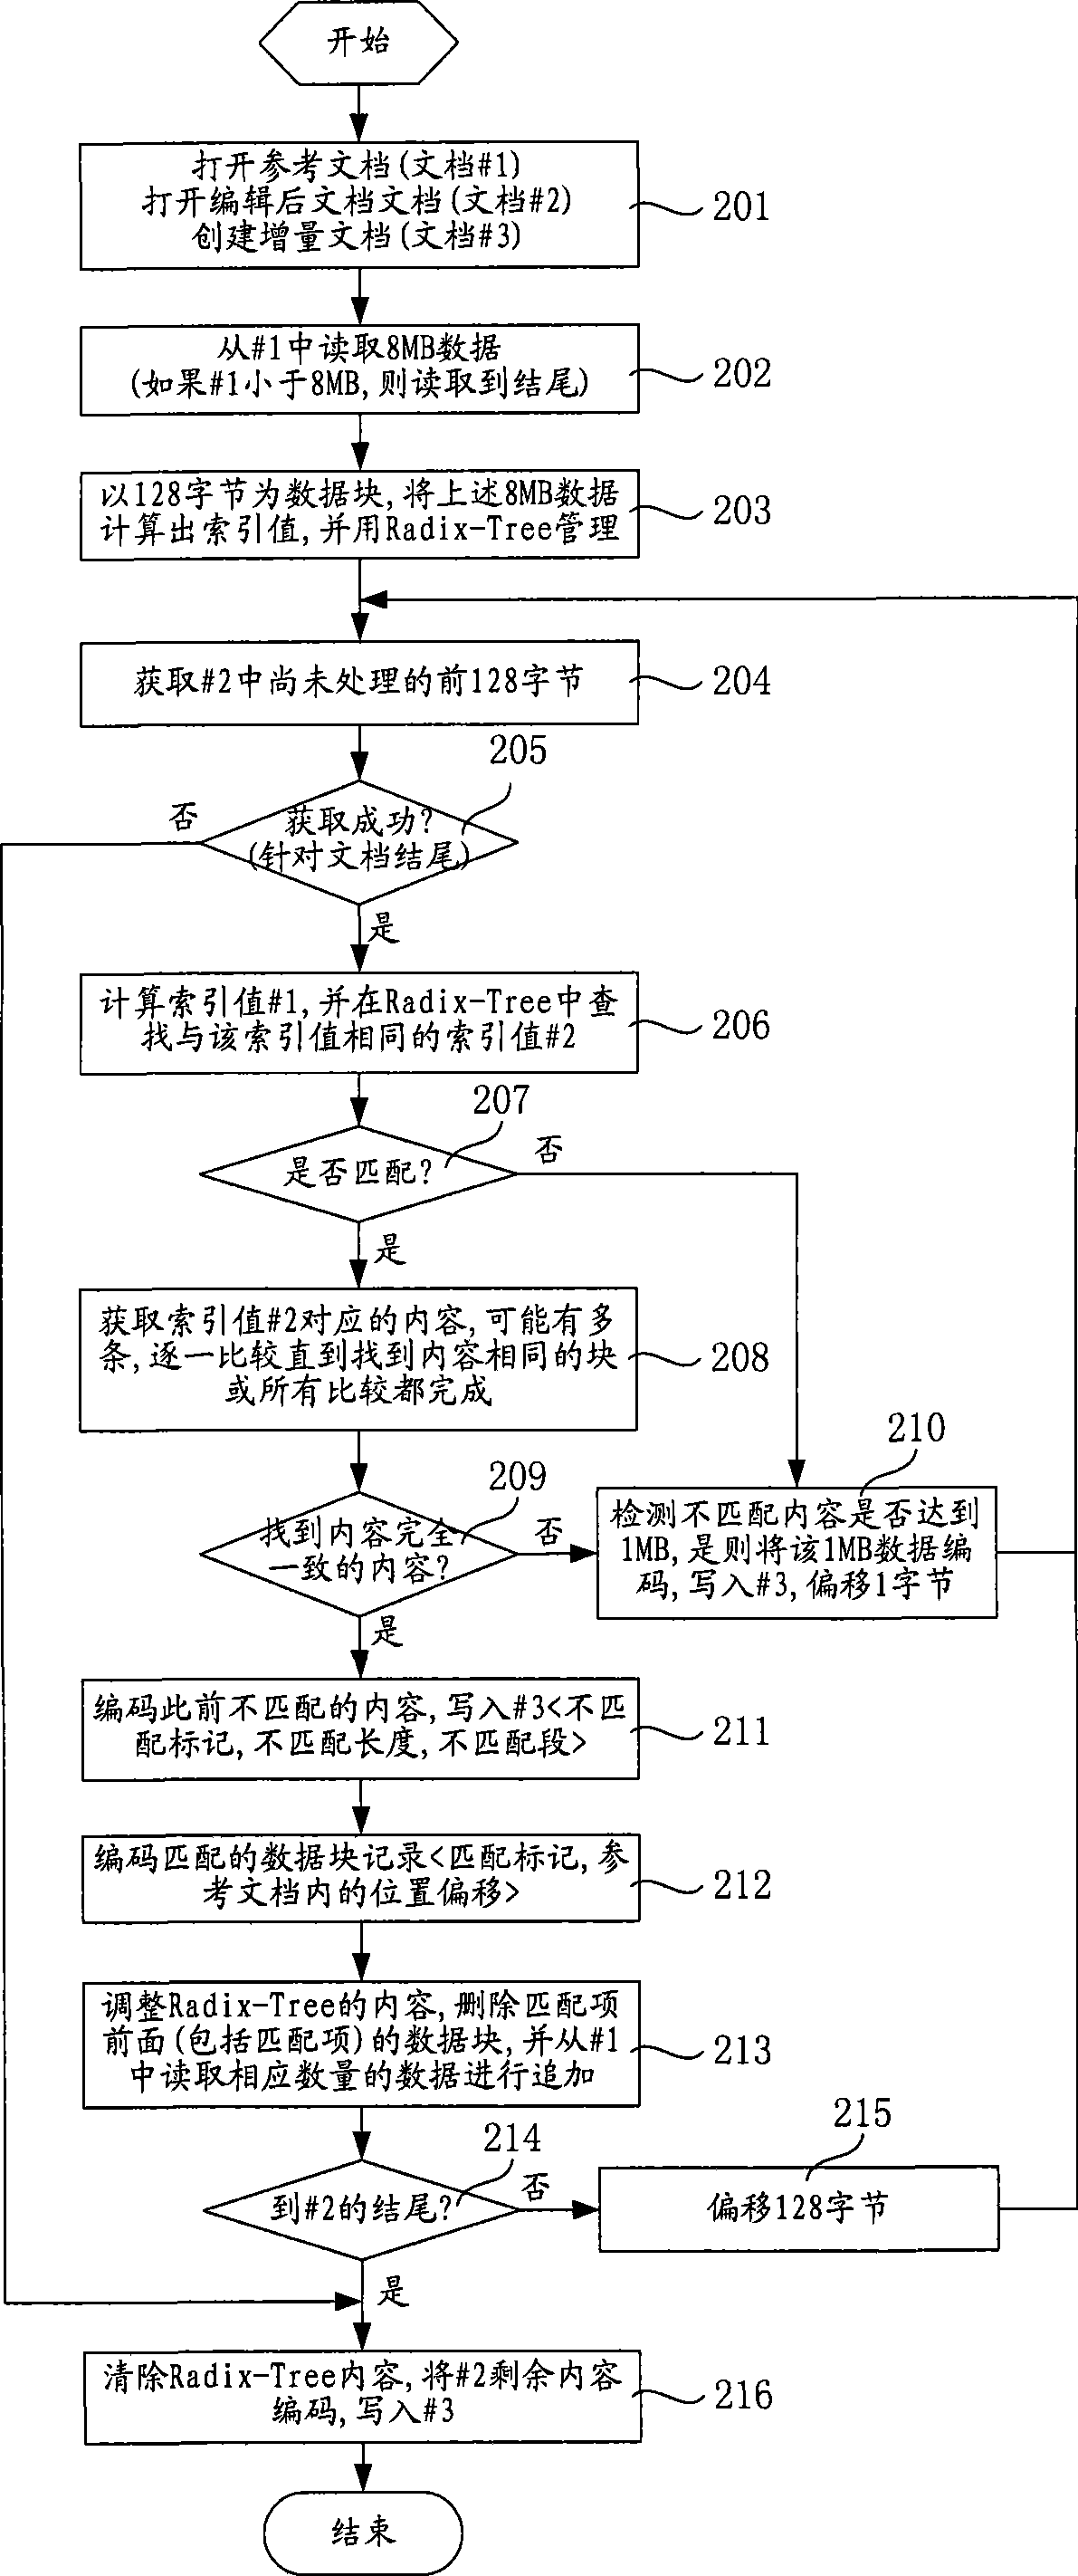 Electronic document increment memory processing method